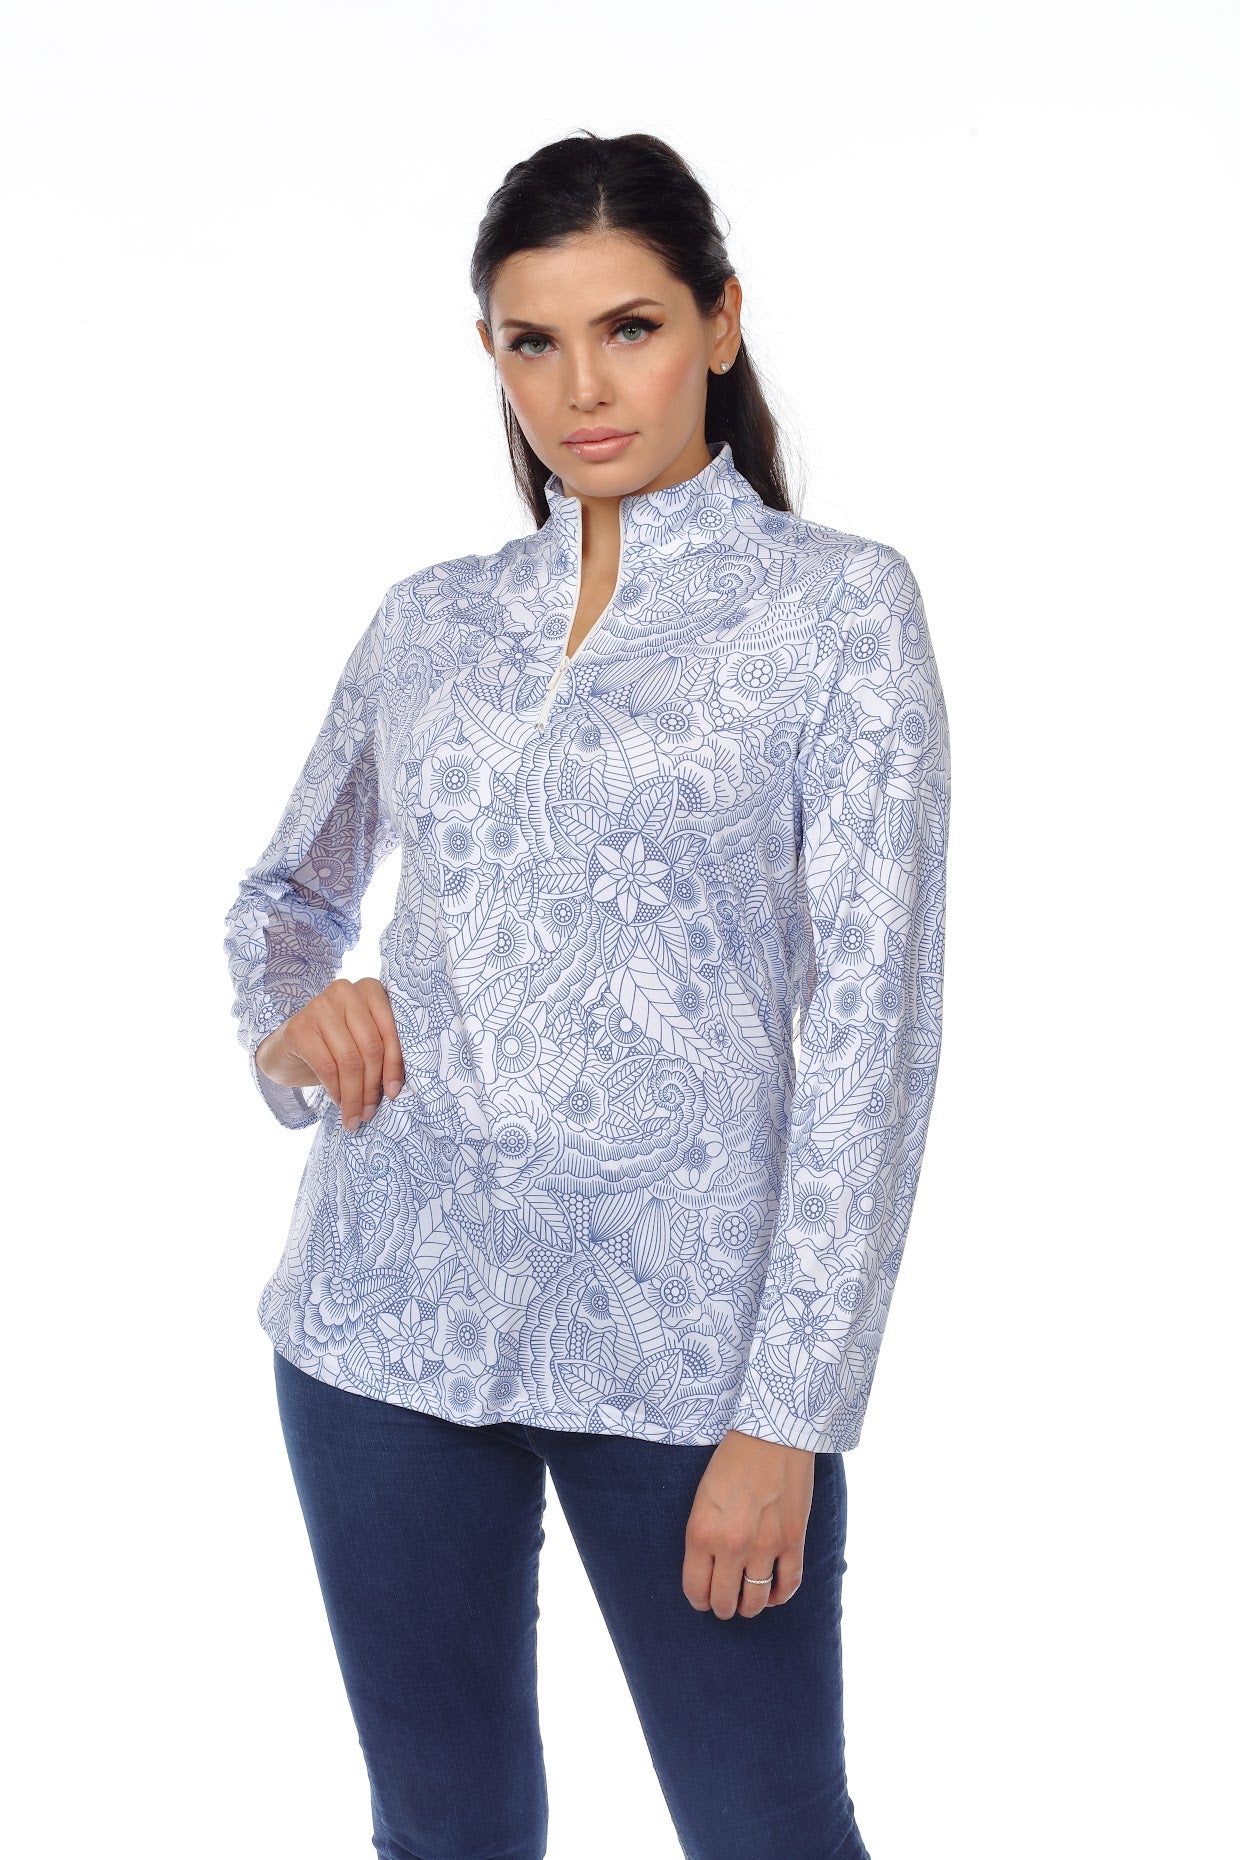 Blue Whimsical Pattern Long Sleeve Top with Zippered Collar